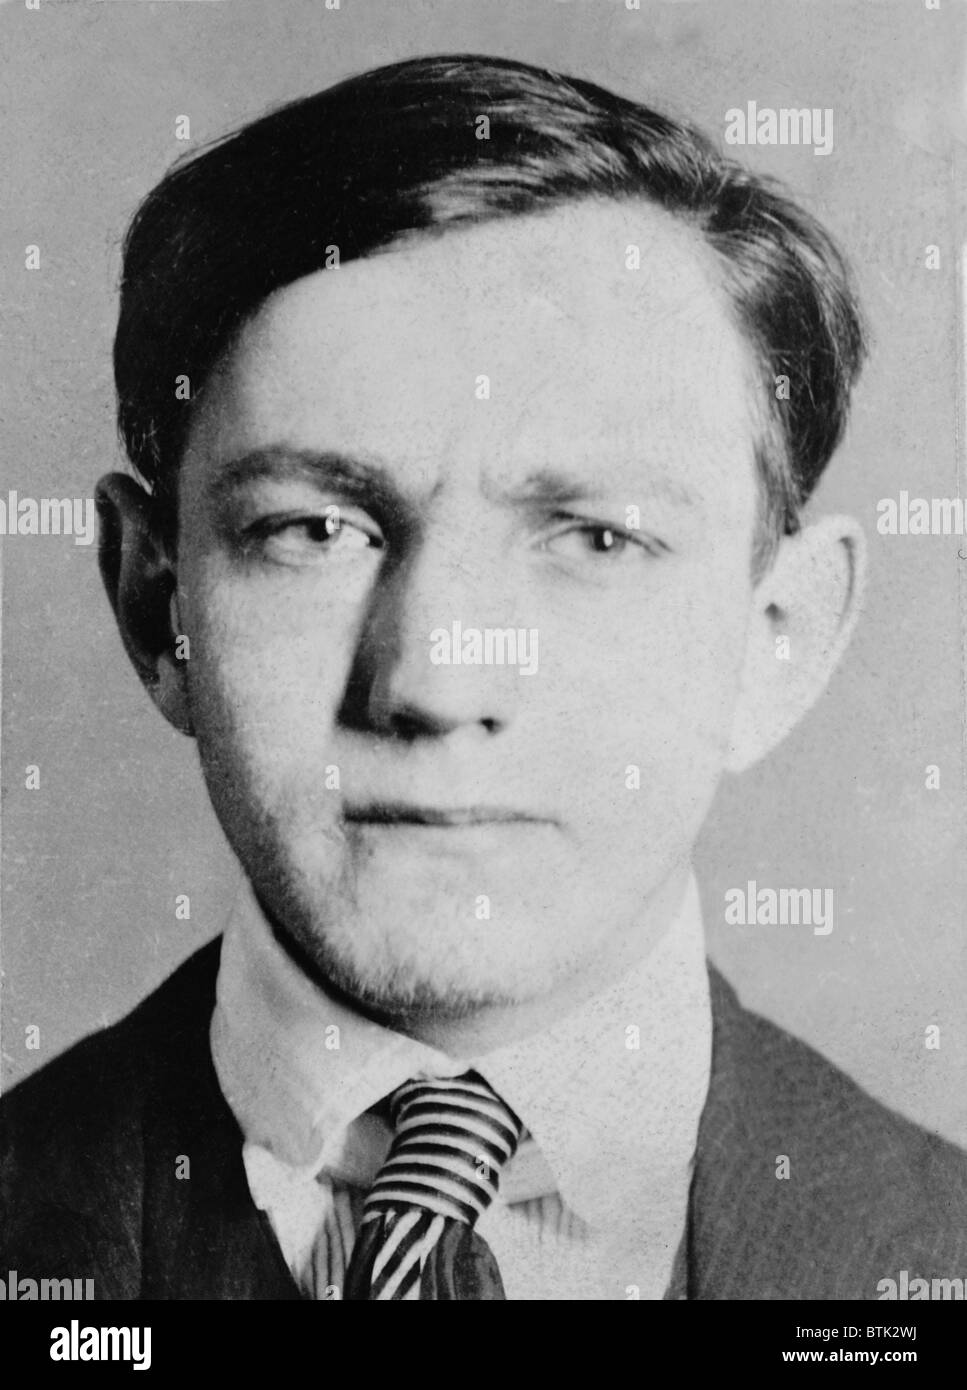 Dutch Schultz, born Arthur Flegenheimer (1902-1935), a bootlegging New York gangster who owned controlled breweries and speakeasies. 1930 photo. Stock Photo